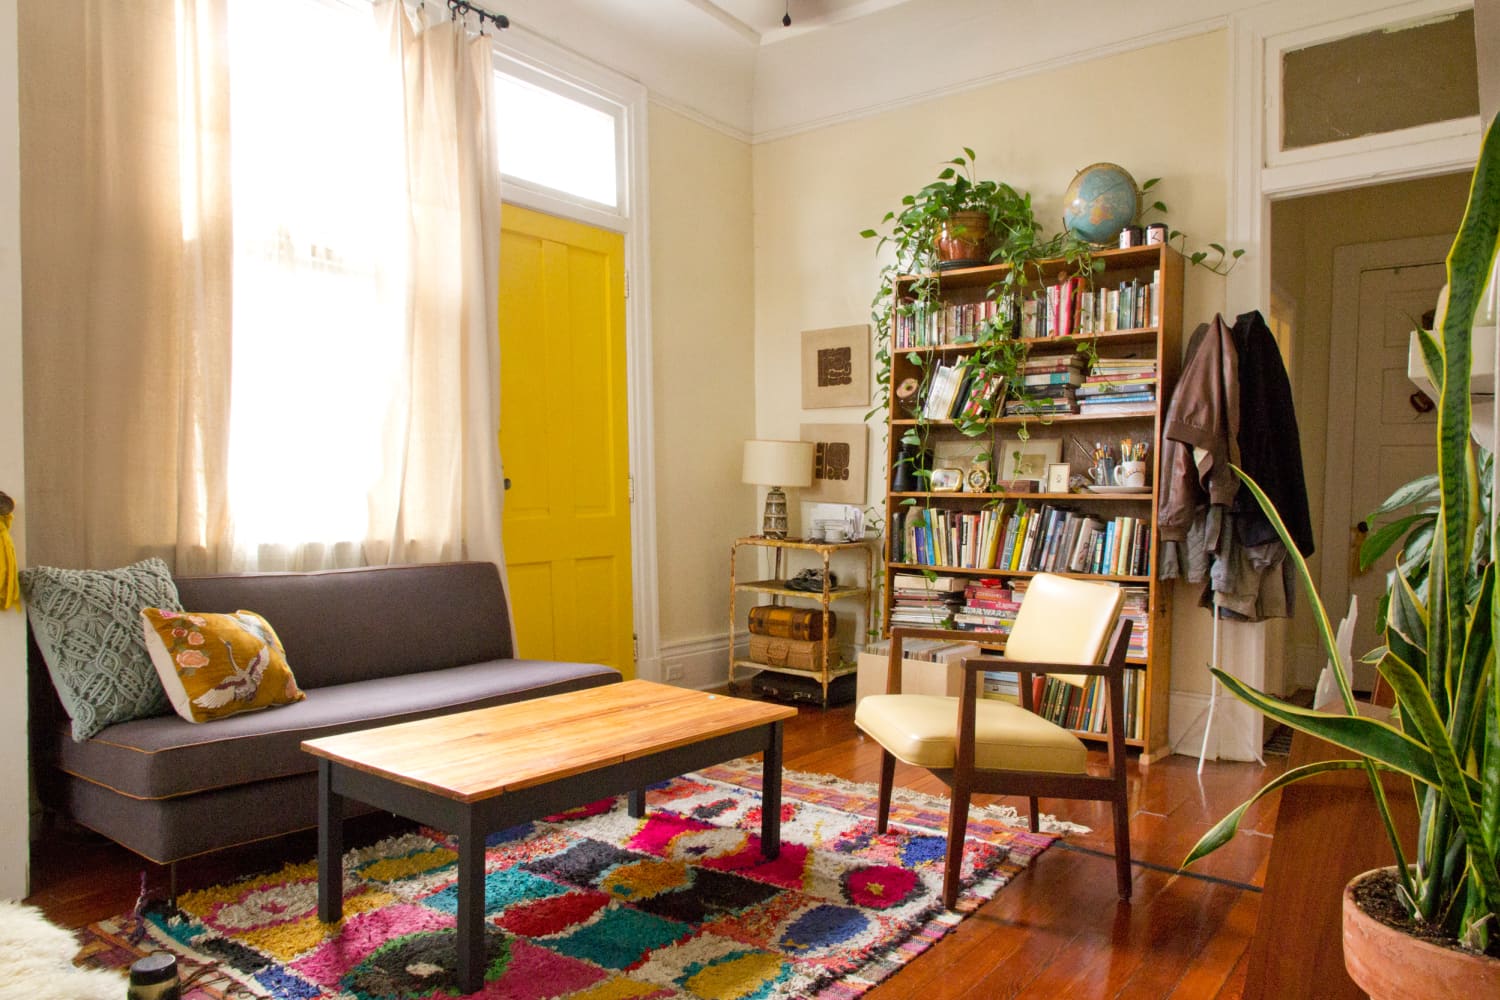 This $22 Amazon Buy Can Completely Transform a Room